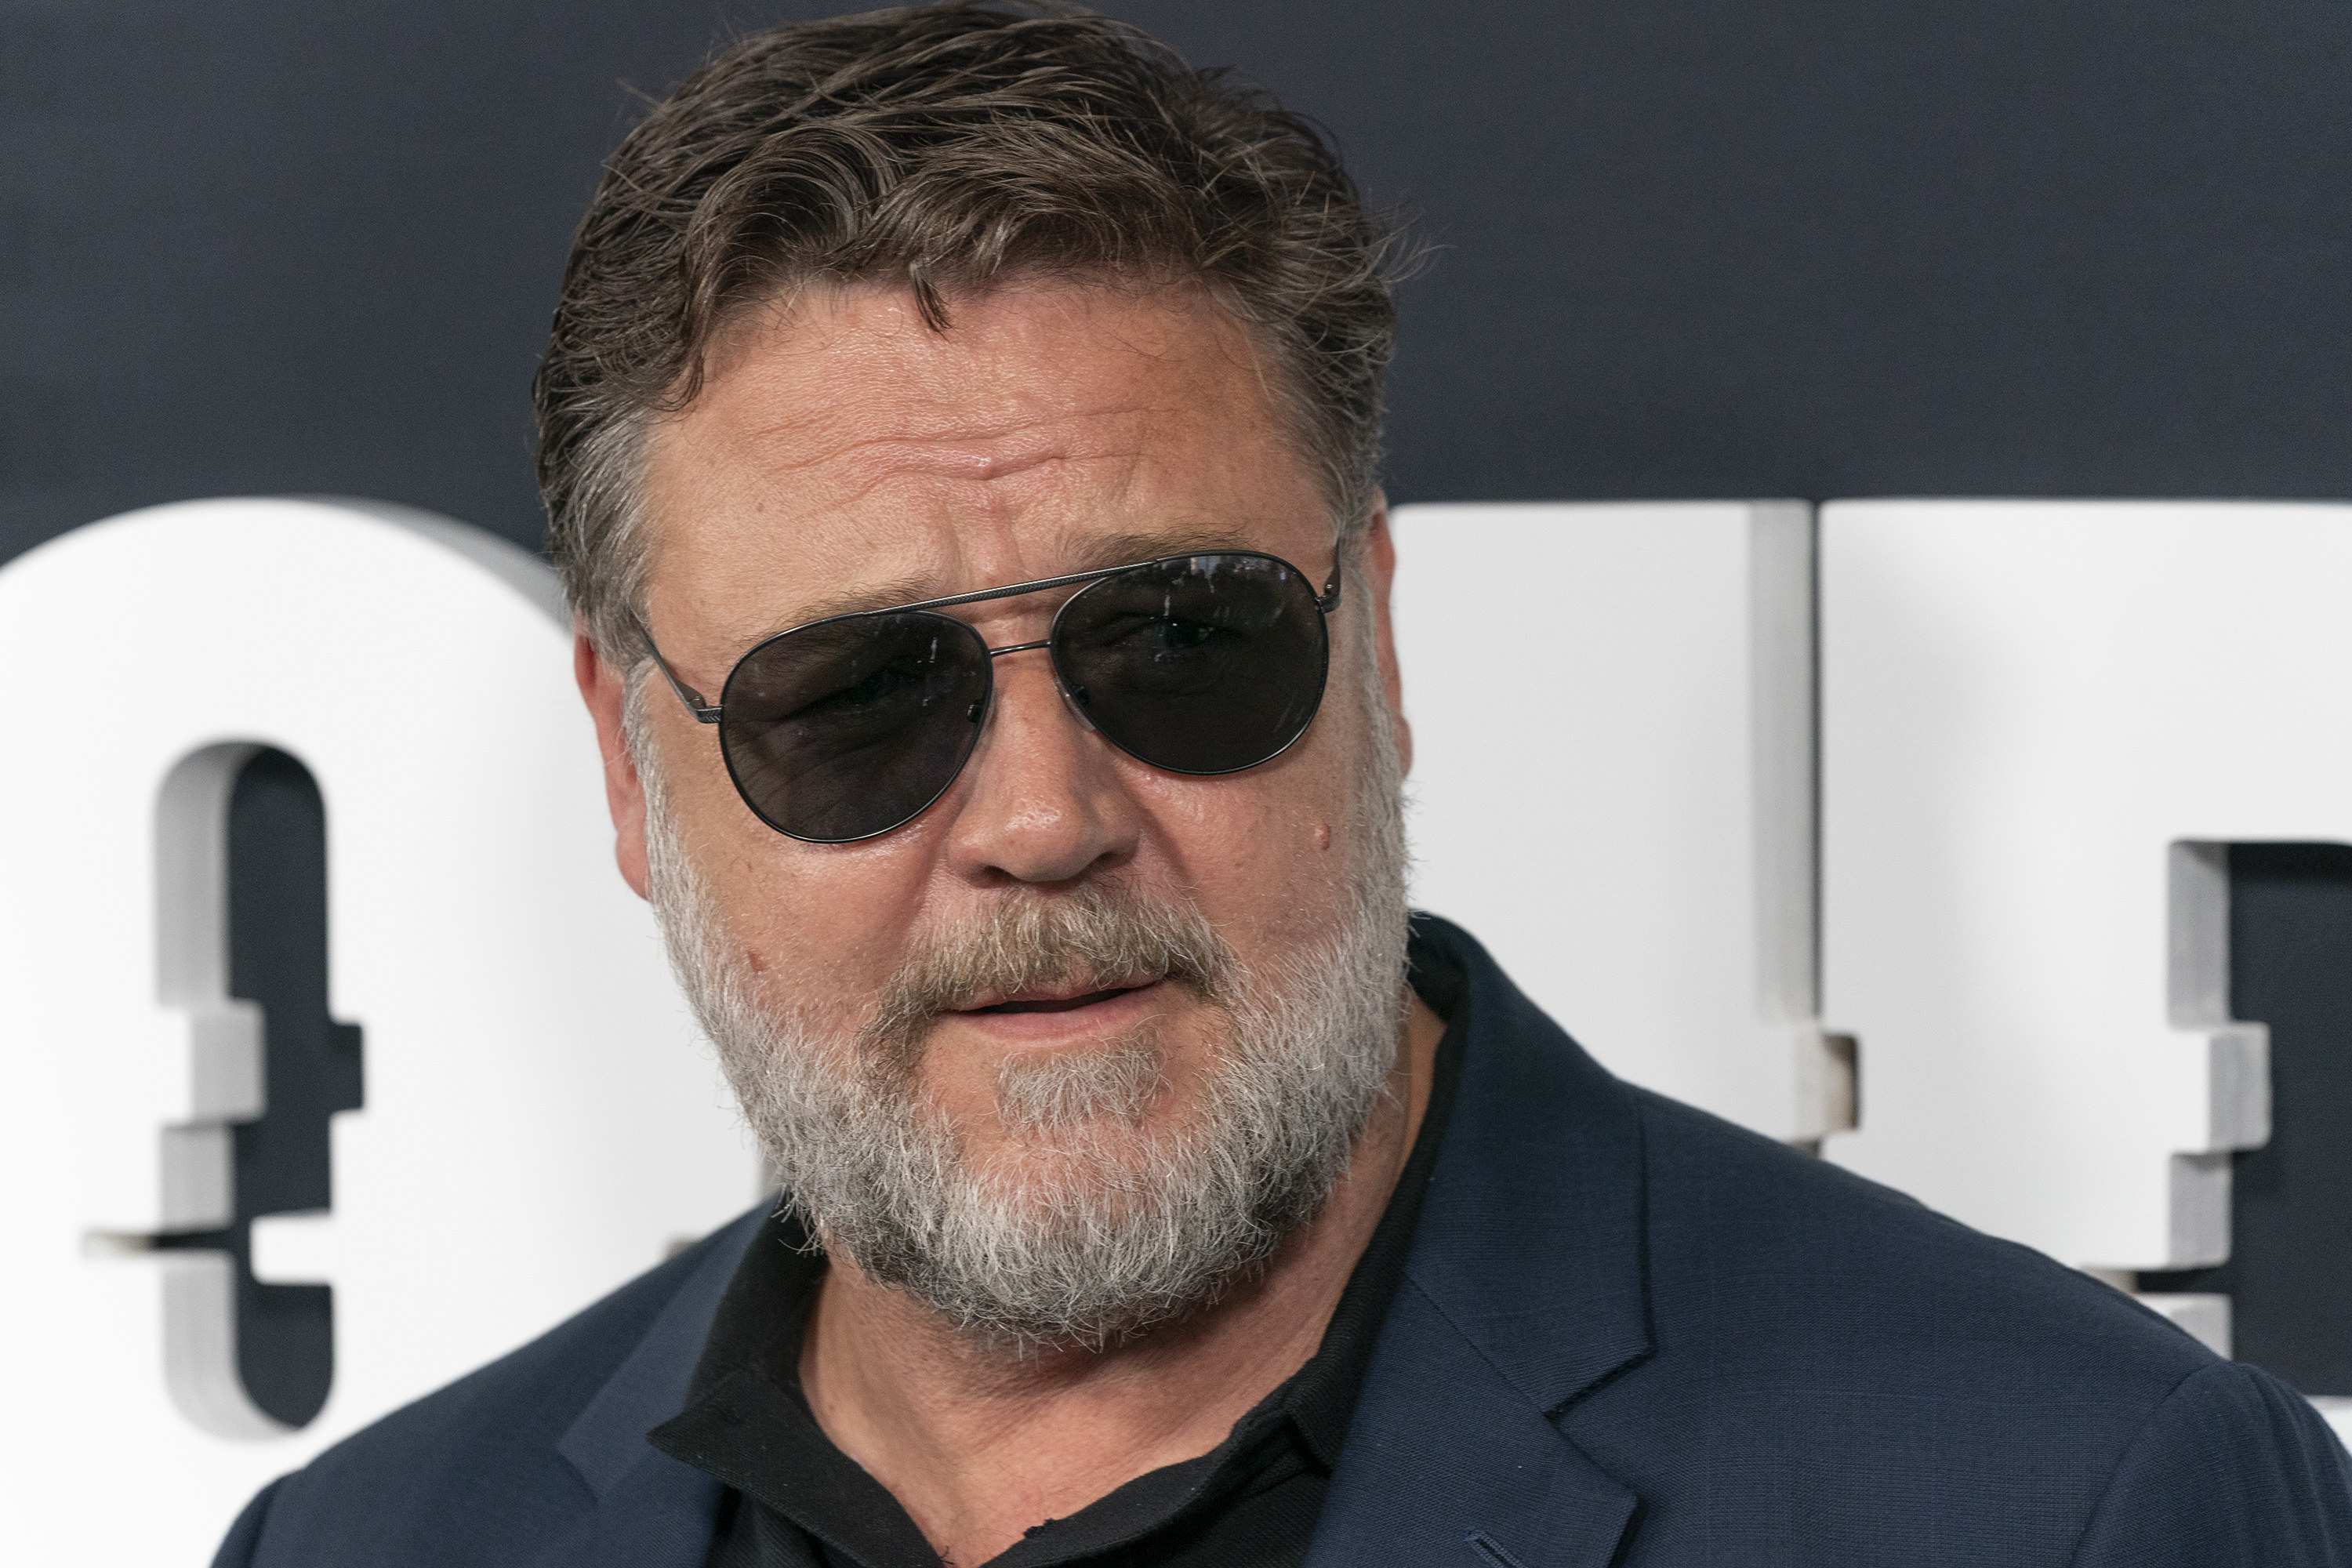 Russell Crowe attends Showtime network premiere of The Loudest Voice at Paris Theatre